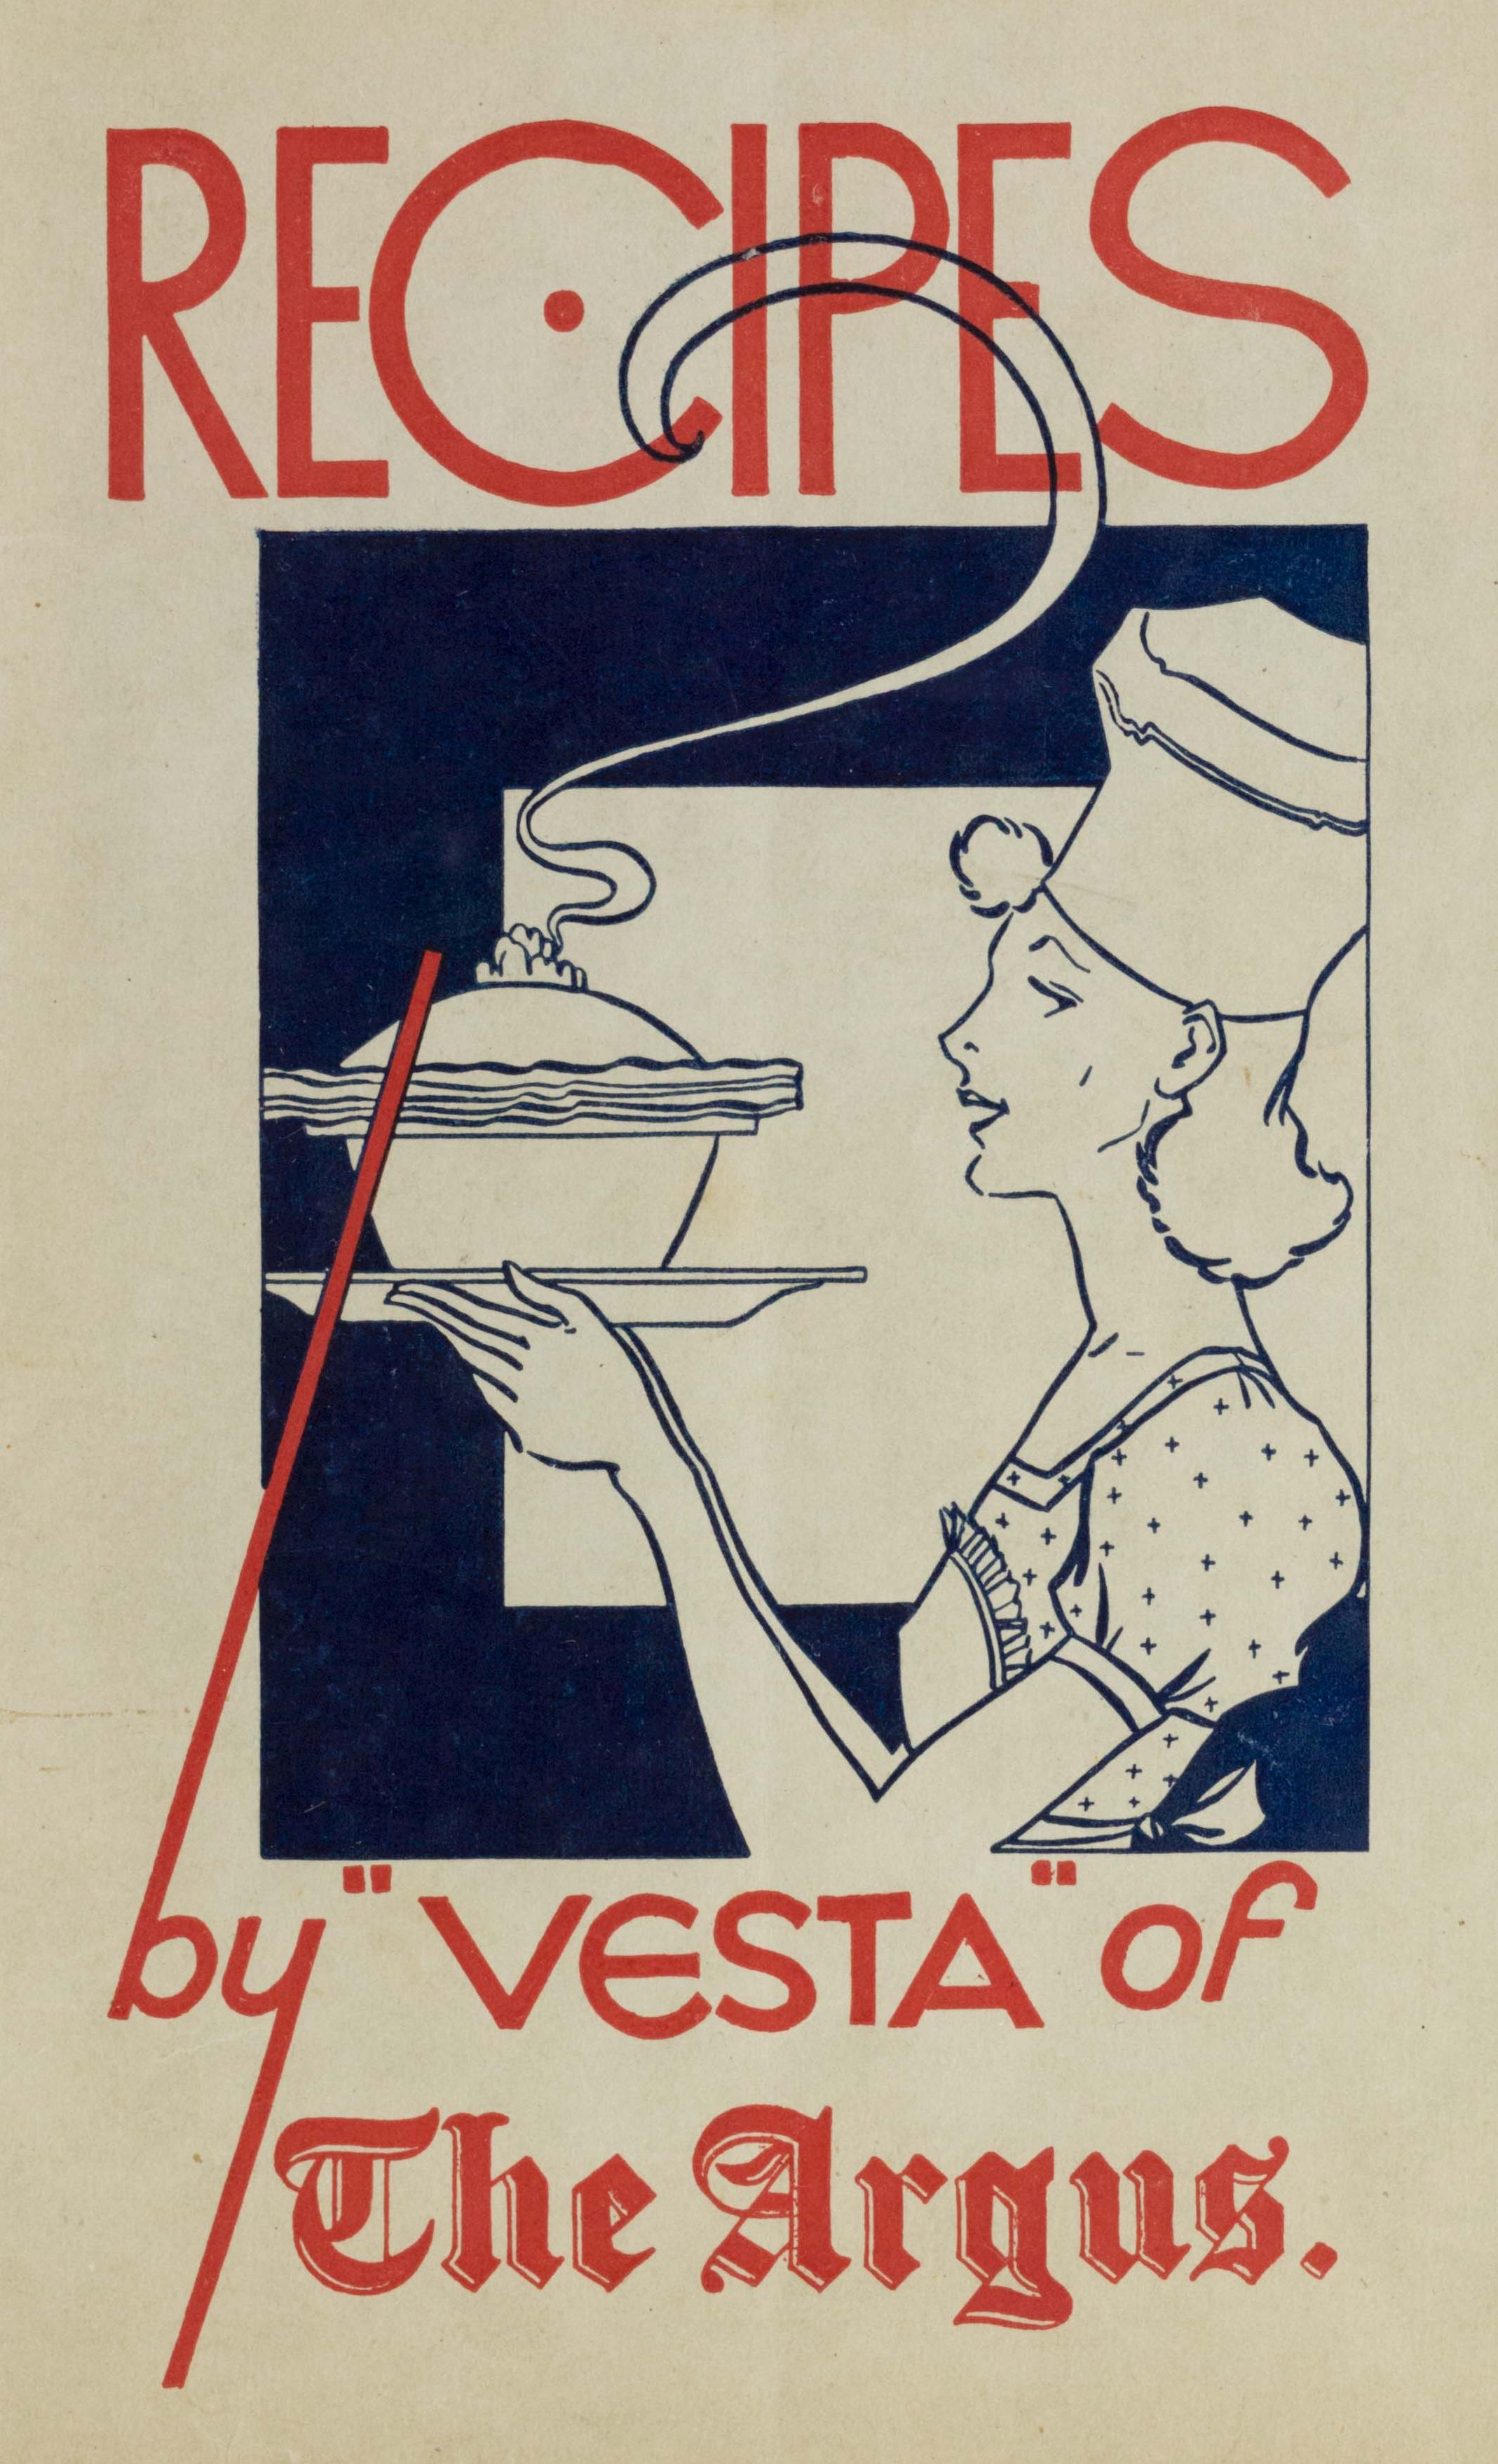 Recipes for all meals: compiled by Vesta, 1938, © Material sourced from the State Library of New South Wales